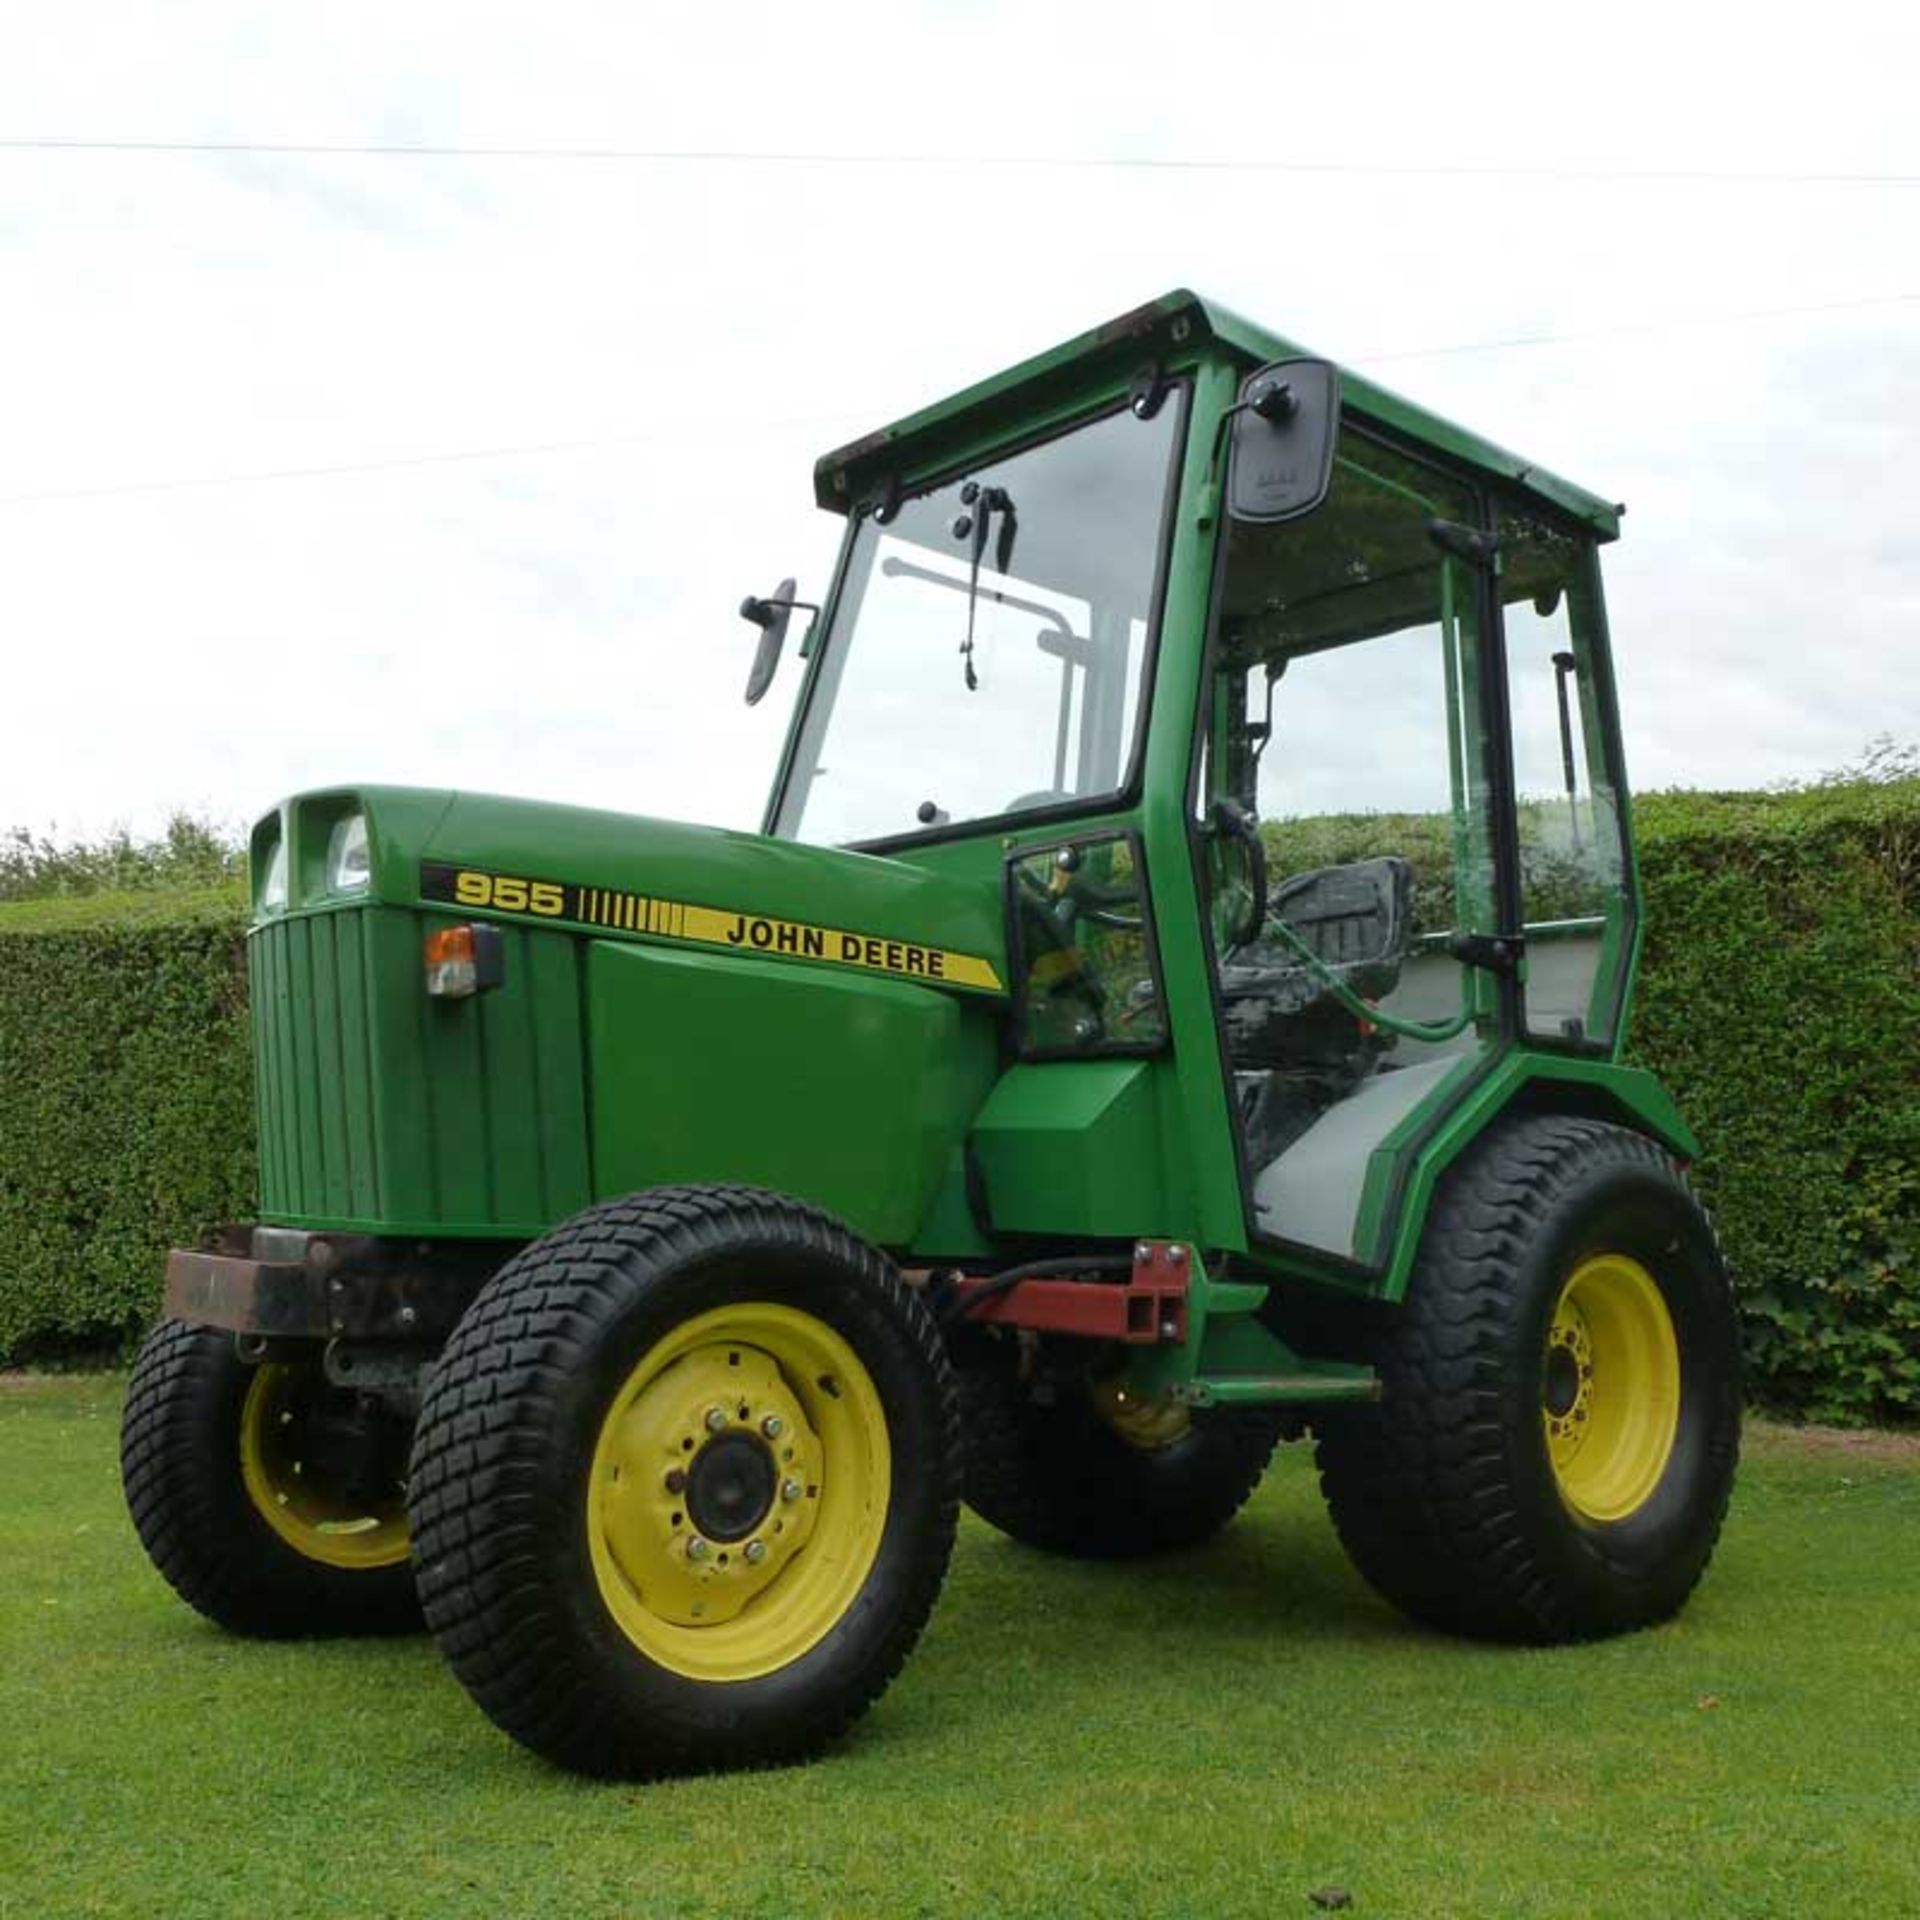 1992 John Deere 955 Compact Tractor With Full Mauser Cab - Image 3 of 3